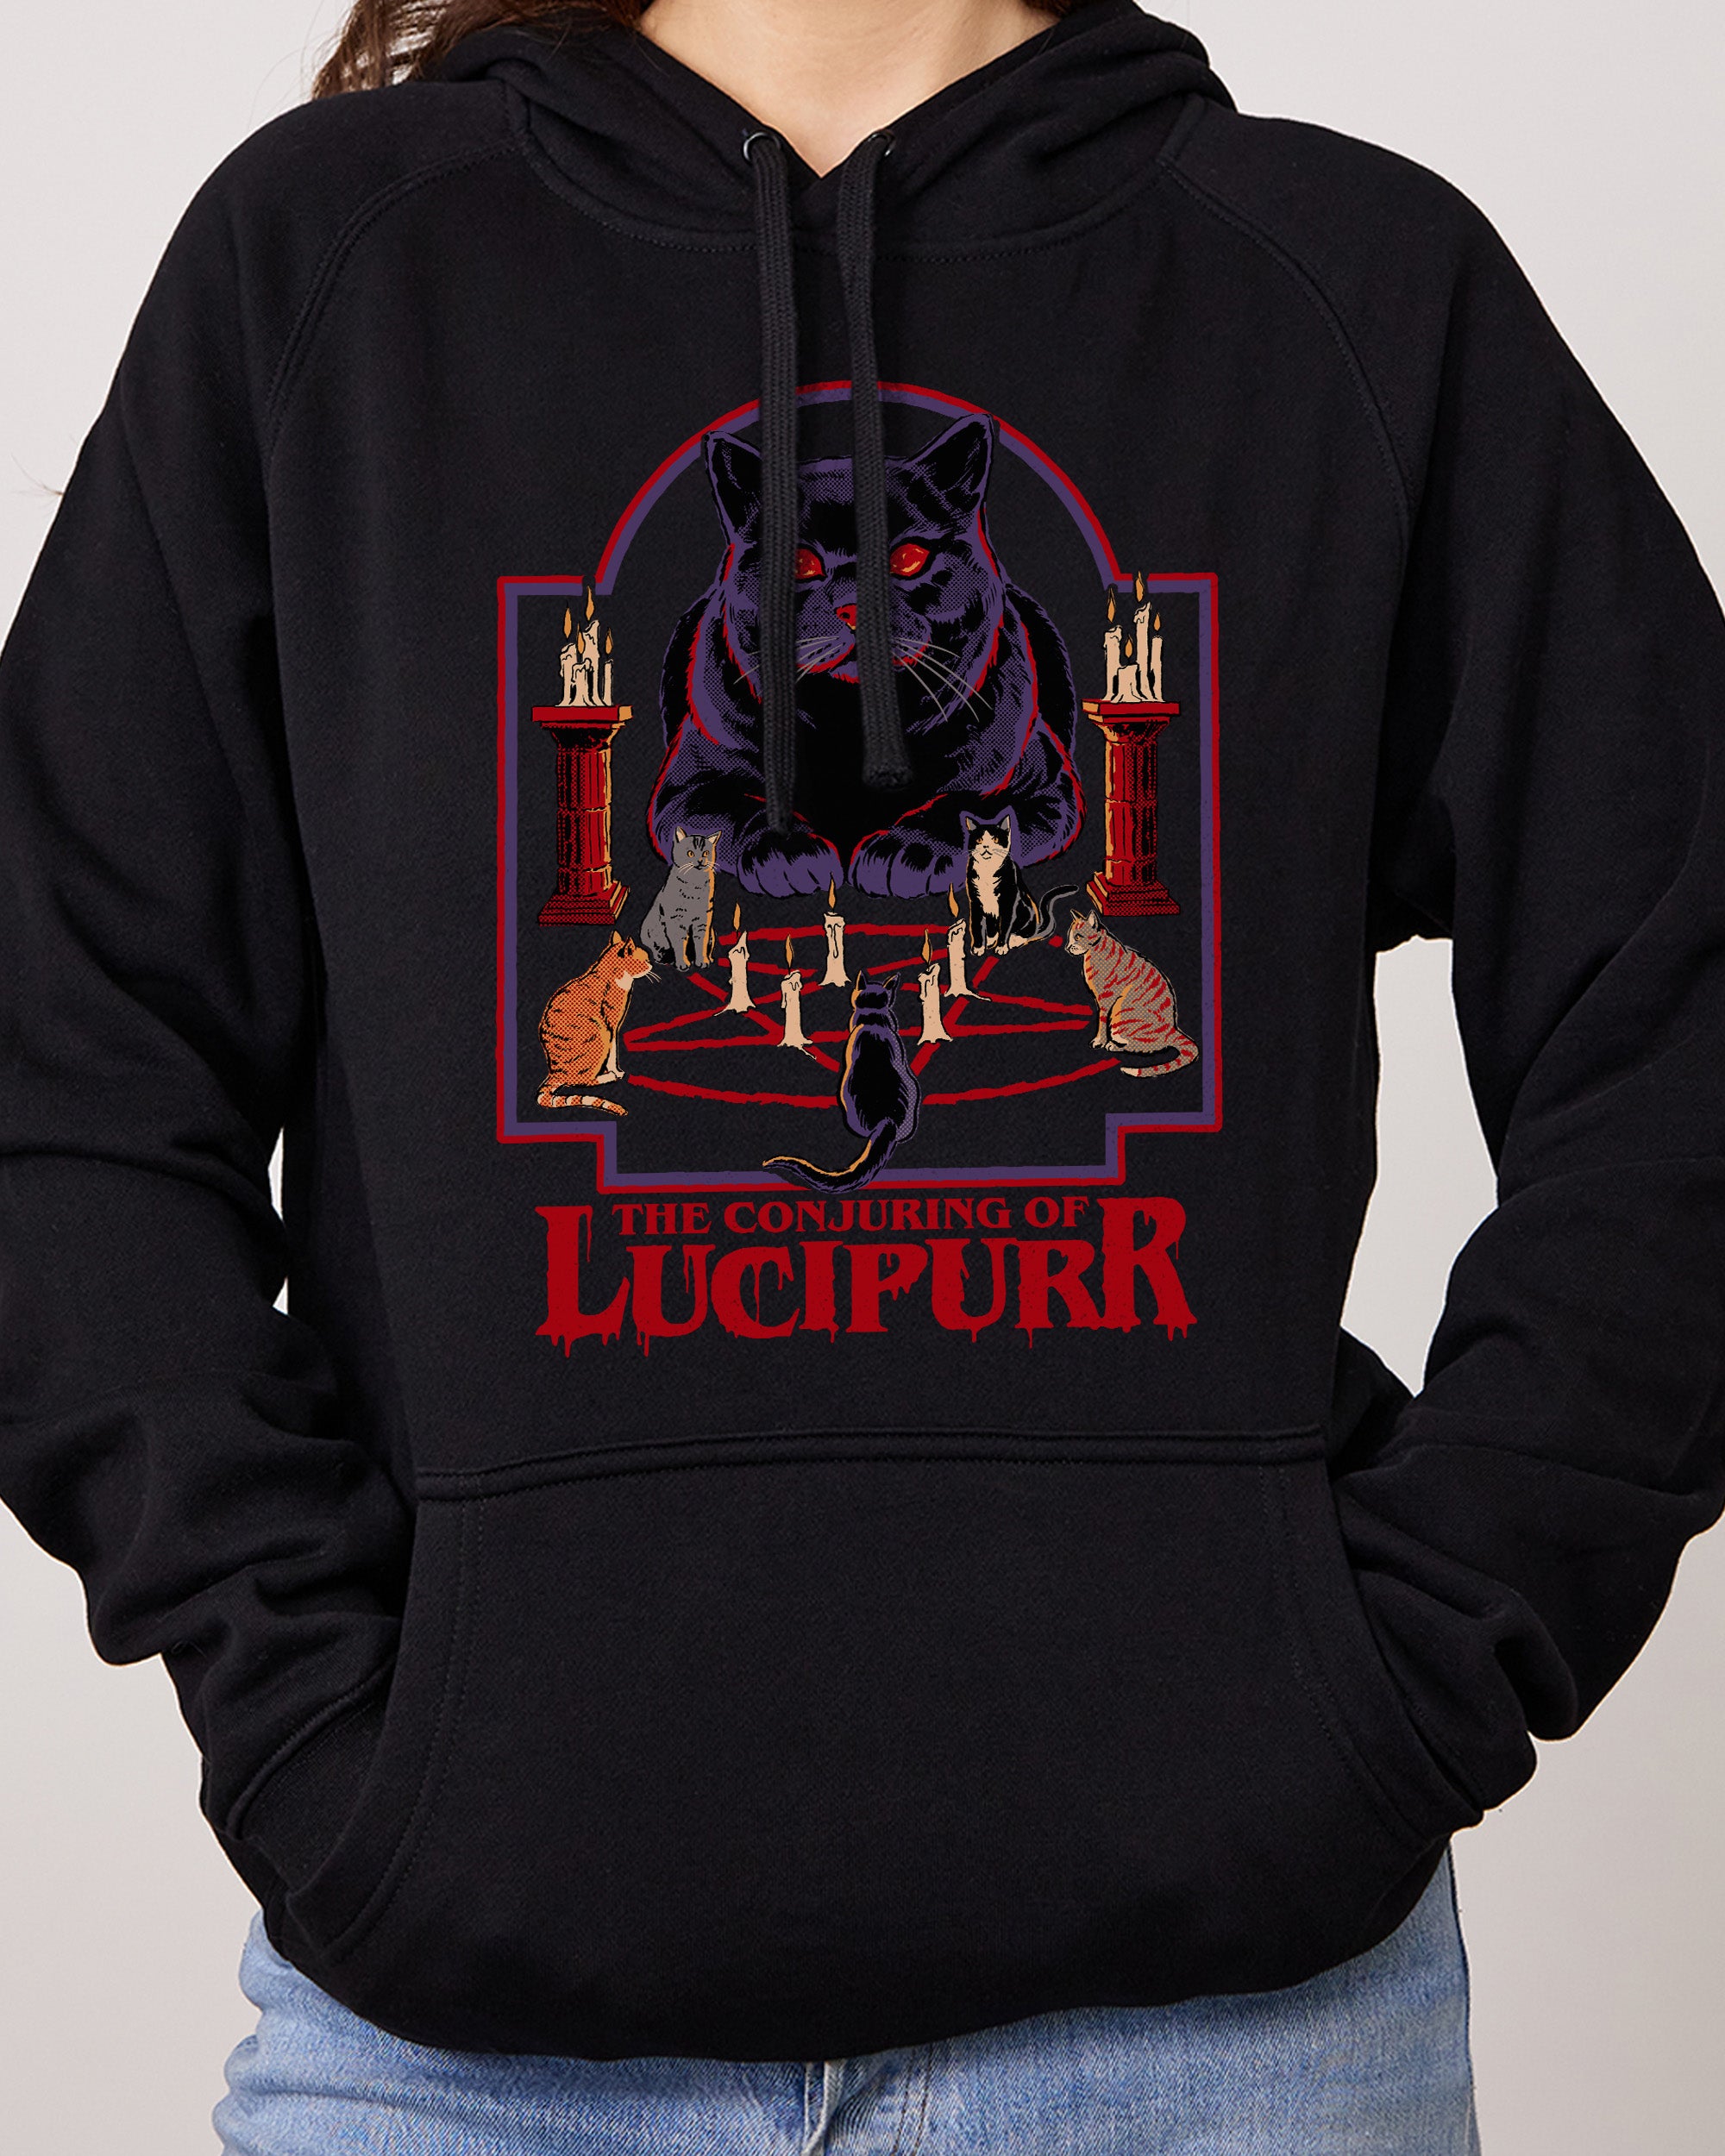 The Conjuring of Lucipurr Hoodie Australia Online